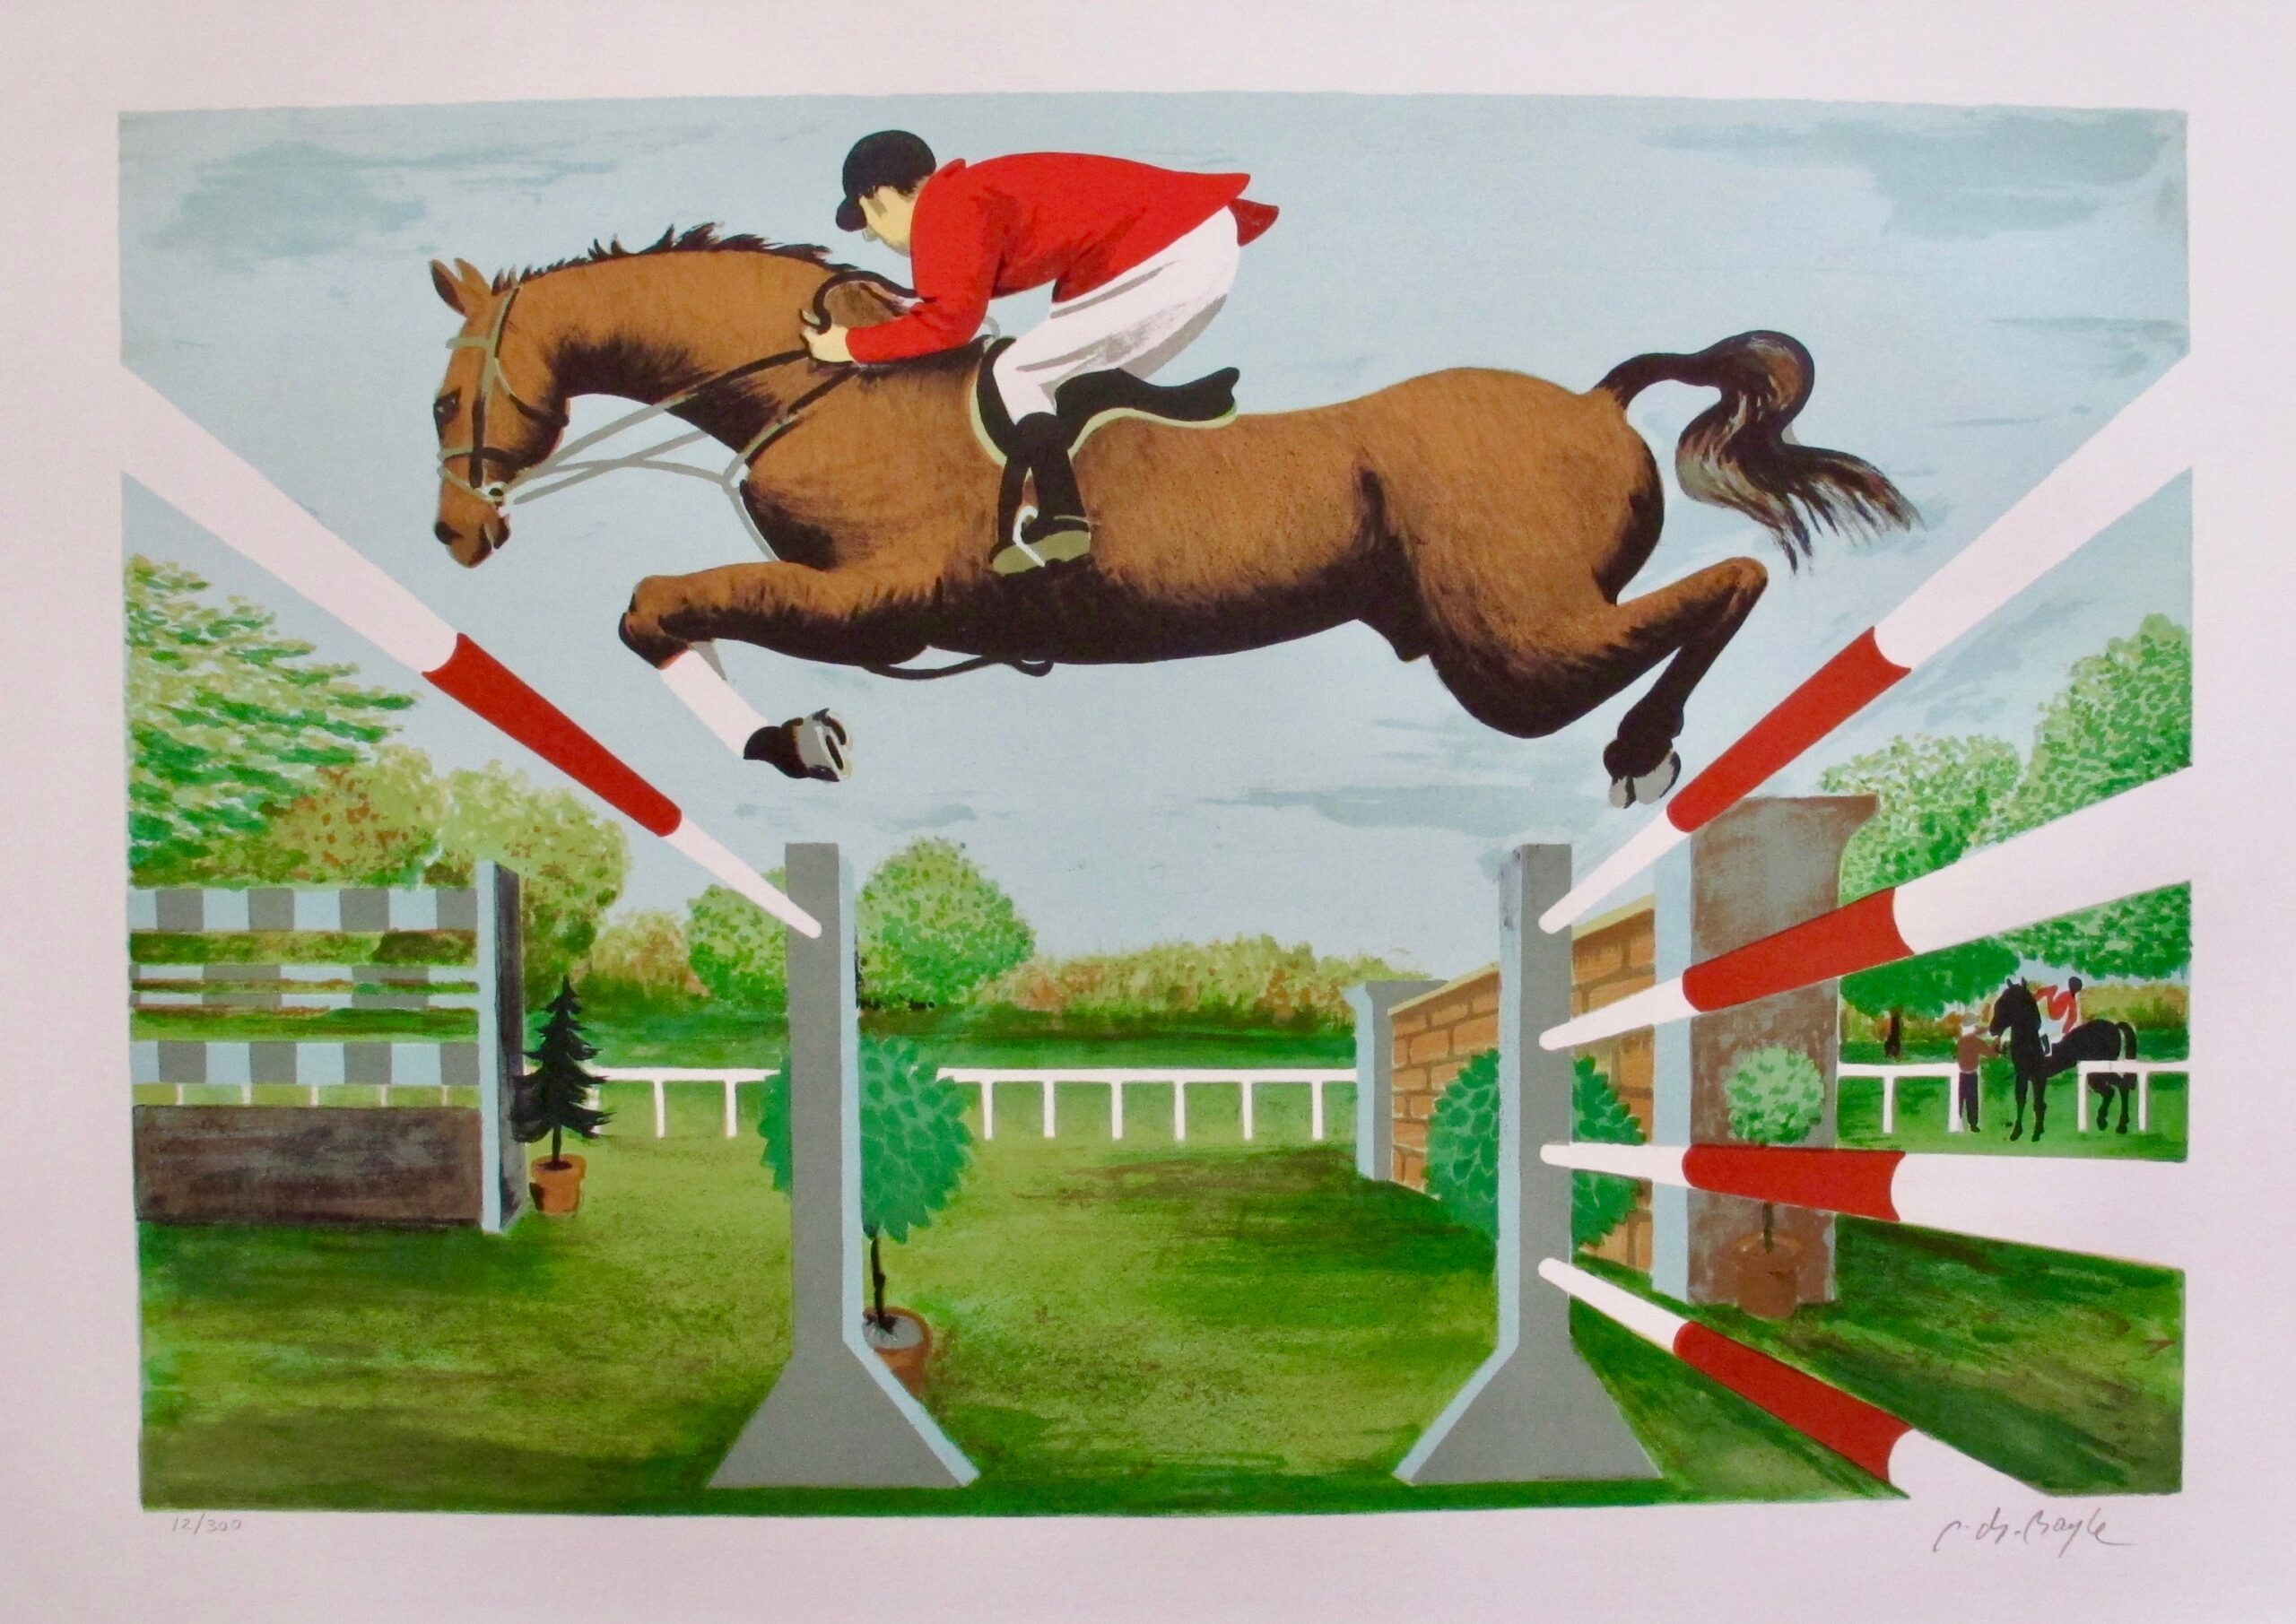 PIERRE CHARLES BAYLE Obstacle Course Hand Signed Lithograph Horse Racing Art